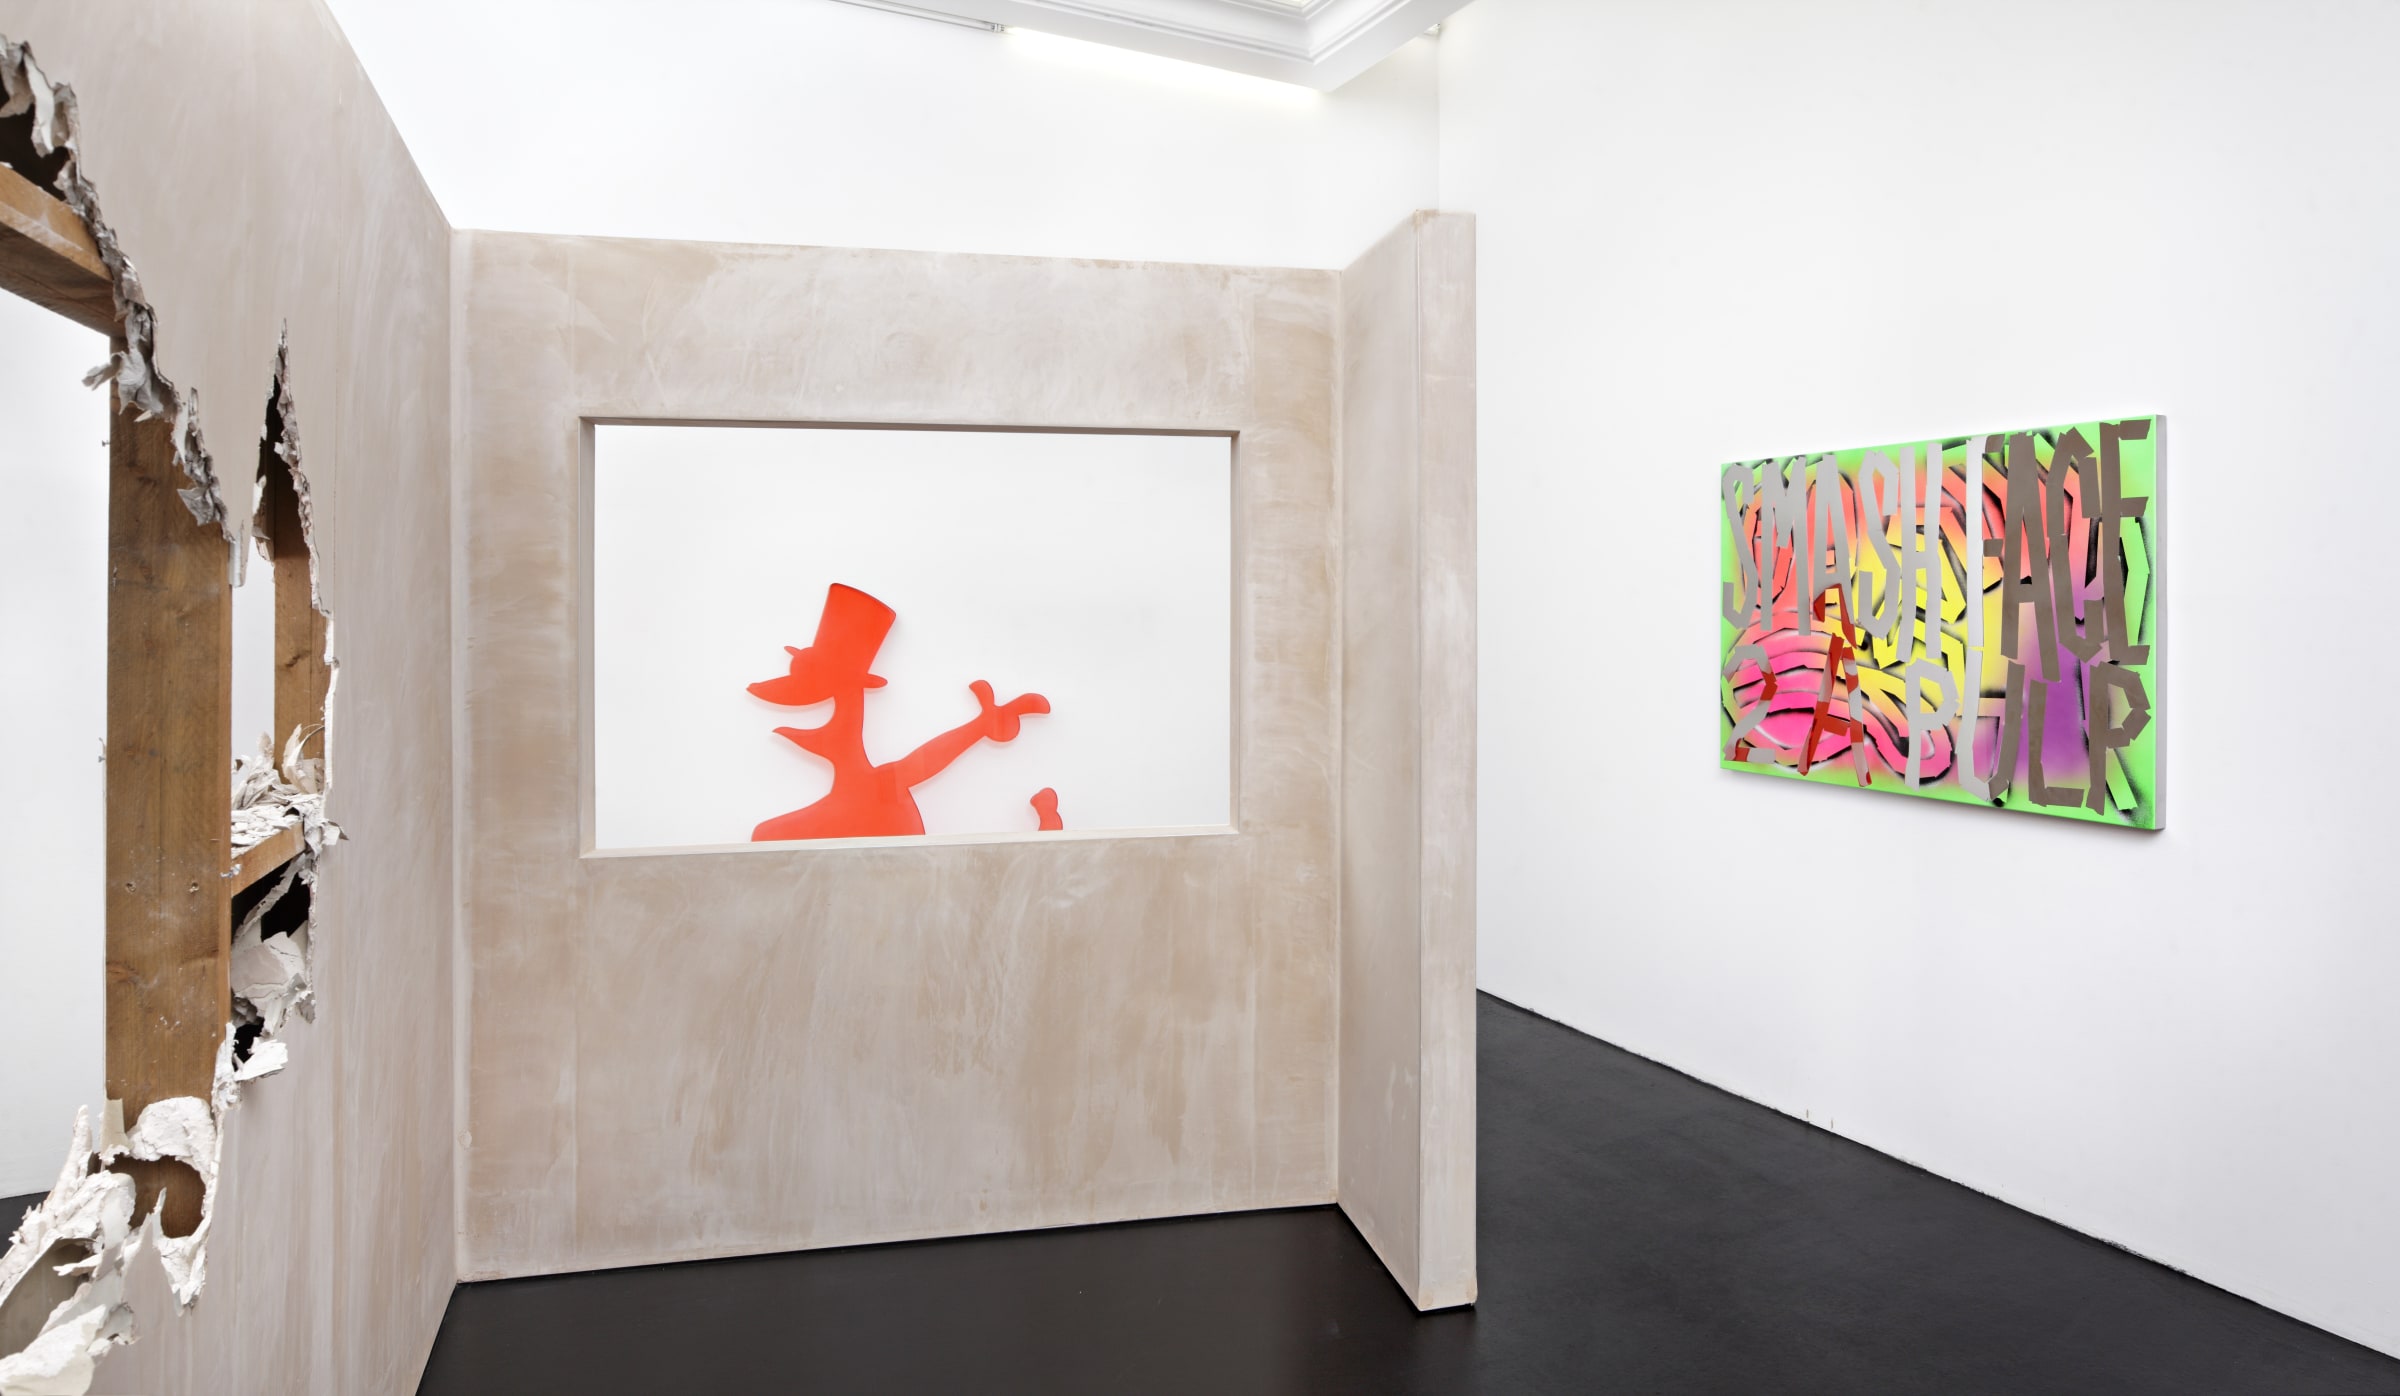 Eddie Peake Penetrates The Body, Nullifies The Senses Installation View January 18 – February 22, 2014 Peres Projects, Berlin